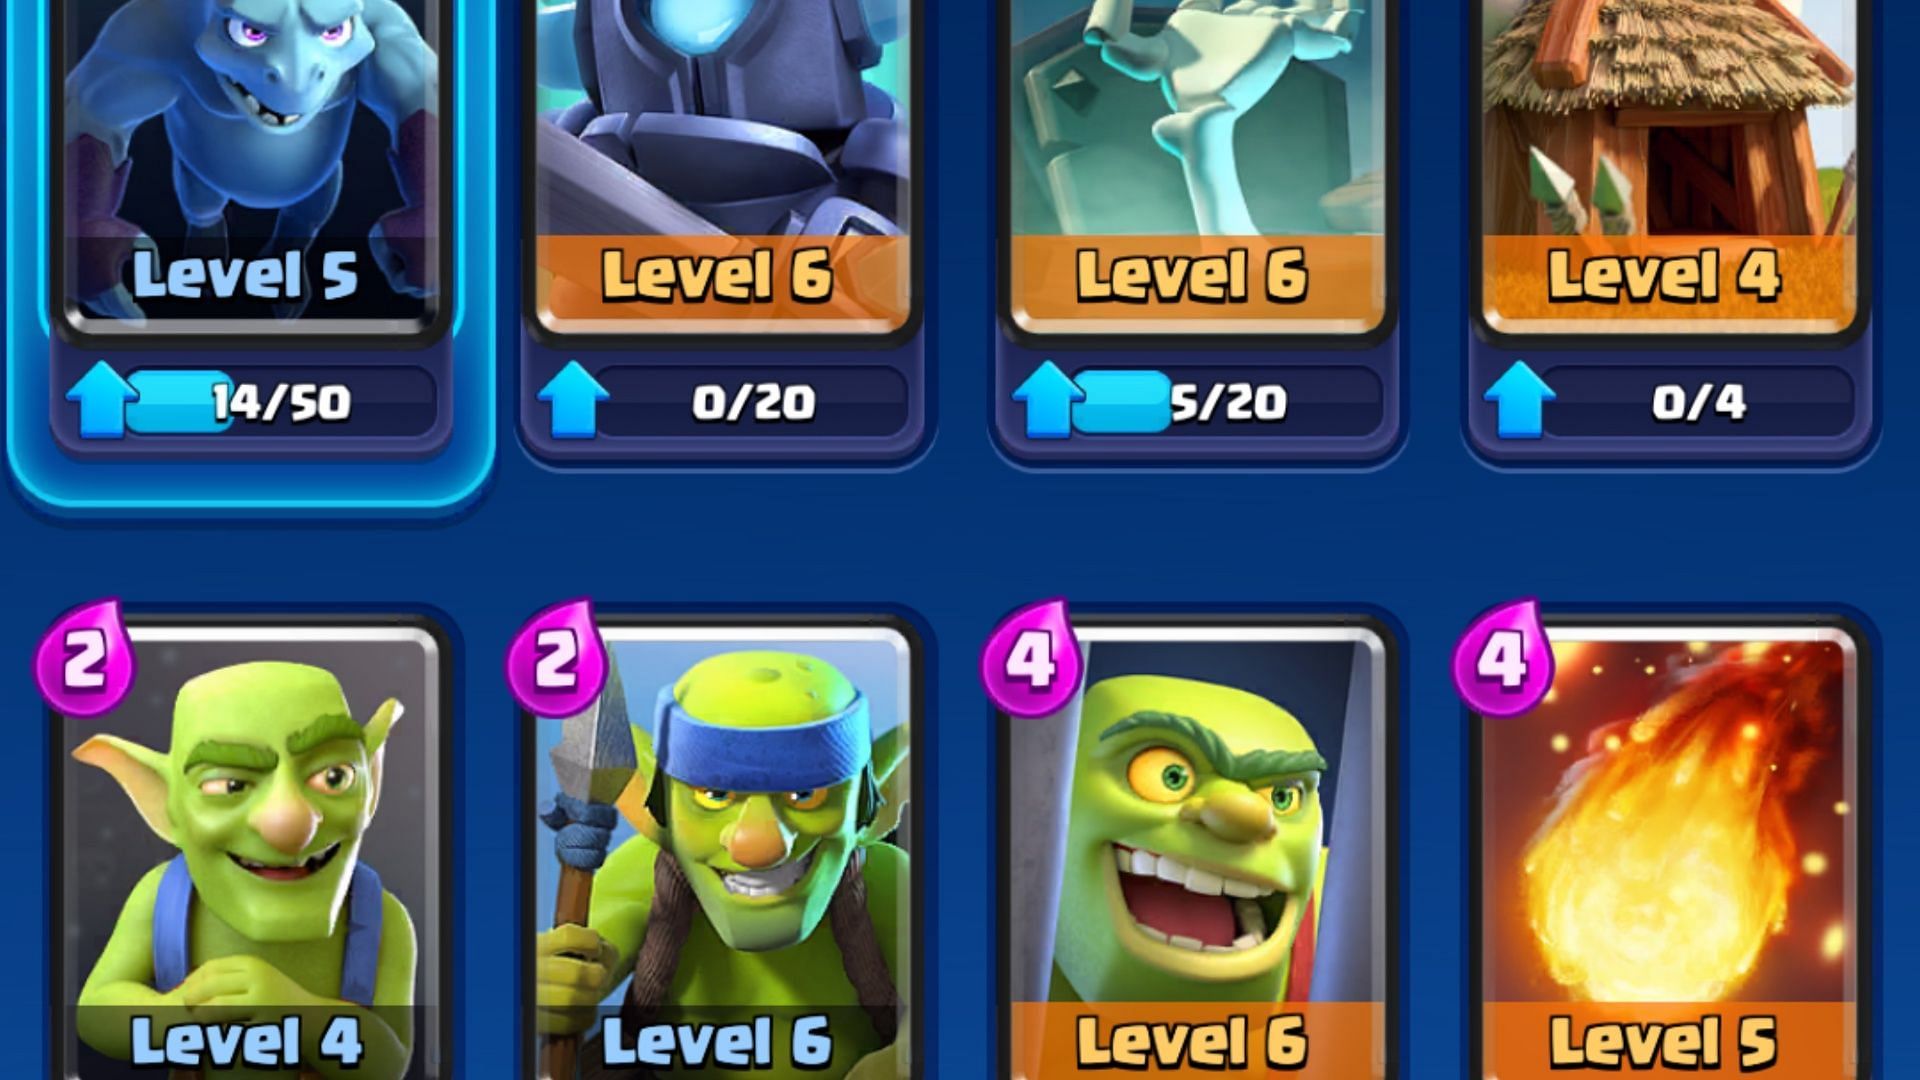 A Deck in Clash Royale to outnumber enemies (Image via Supercell)